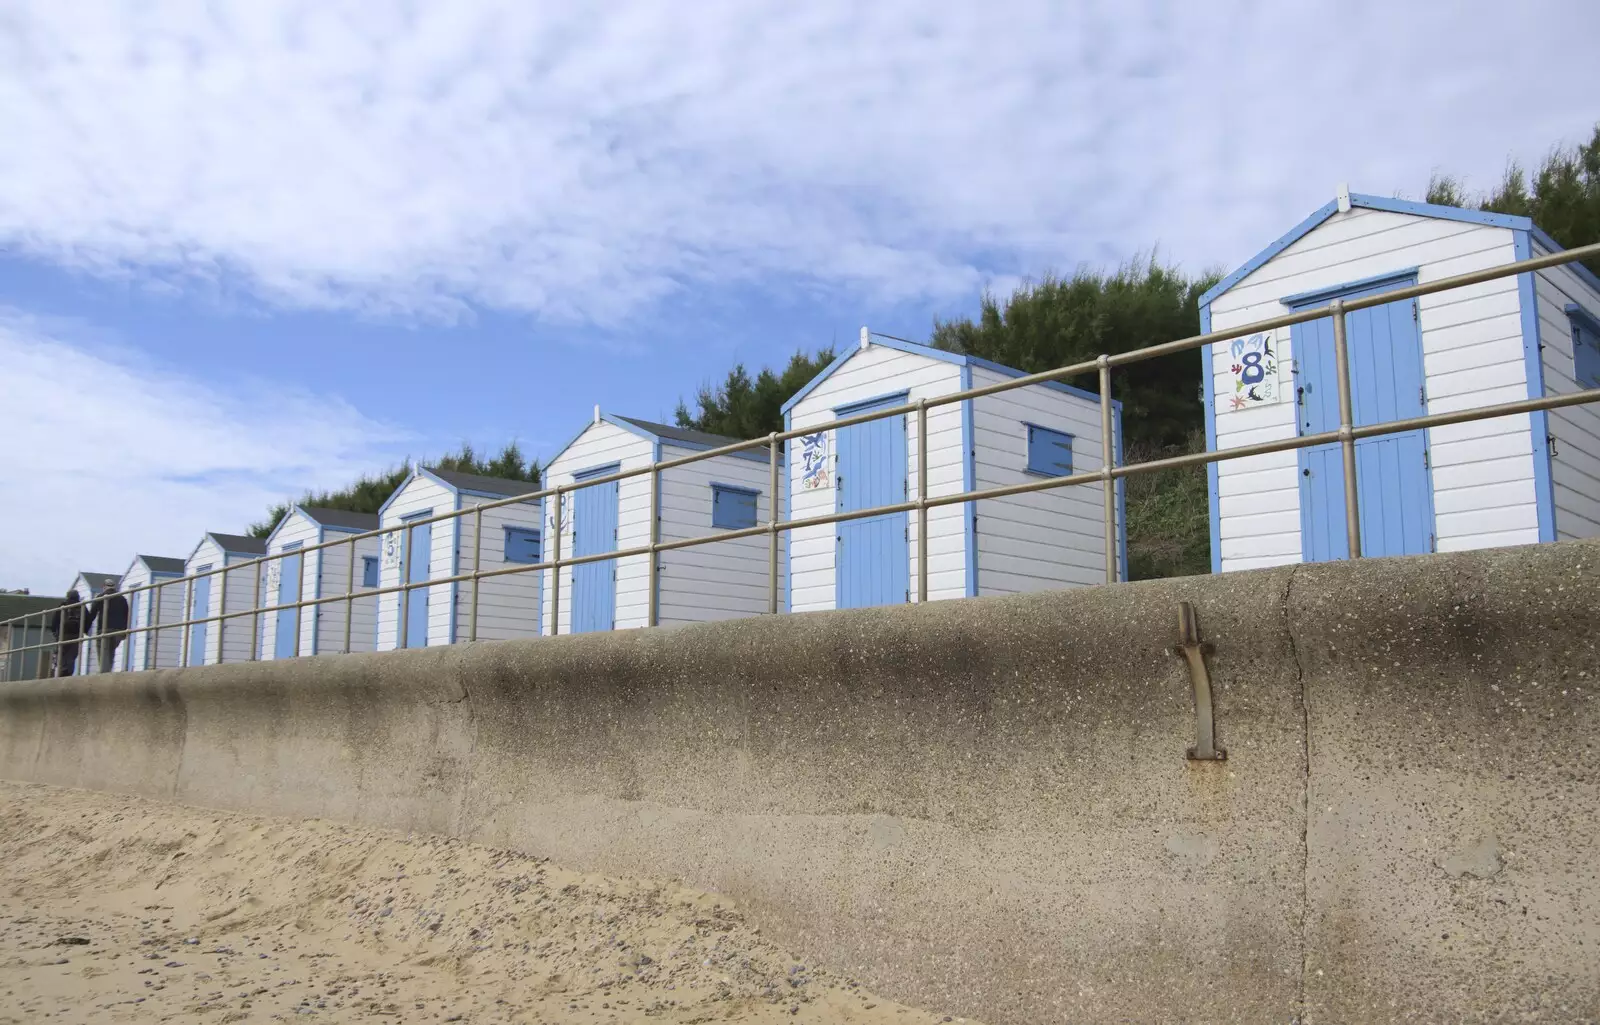 More Southwold beach huts, from The Waverley Paddle Steamer at Southwold Pier, Suffolk - 27th September 2023